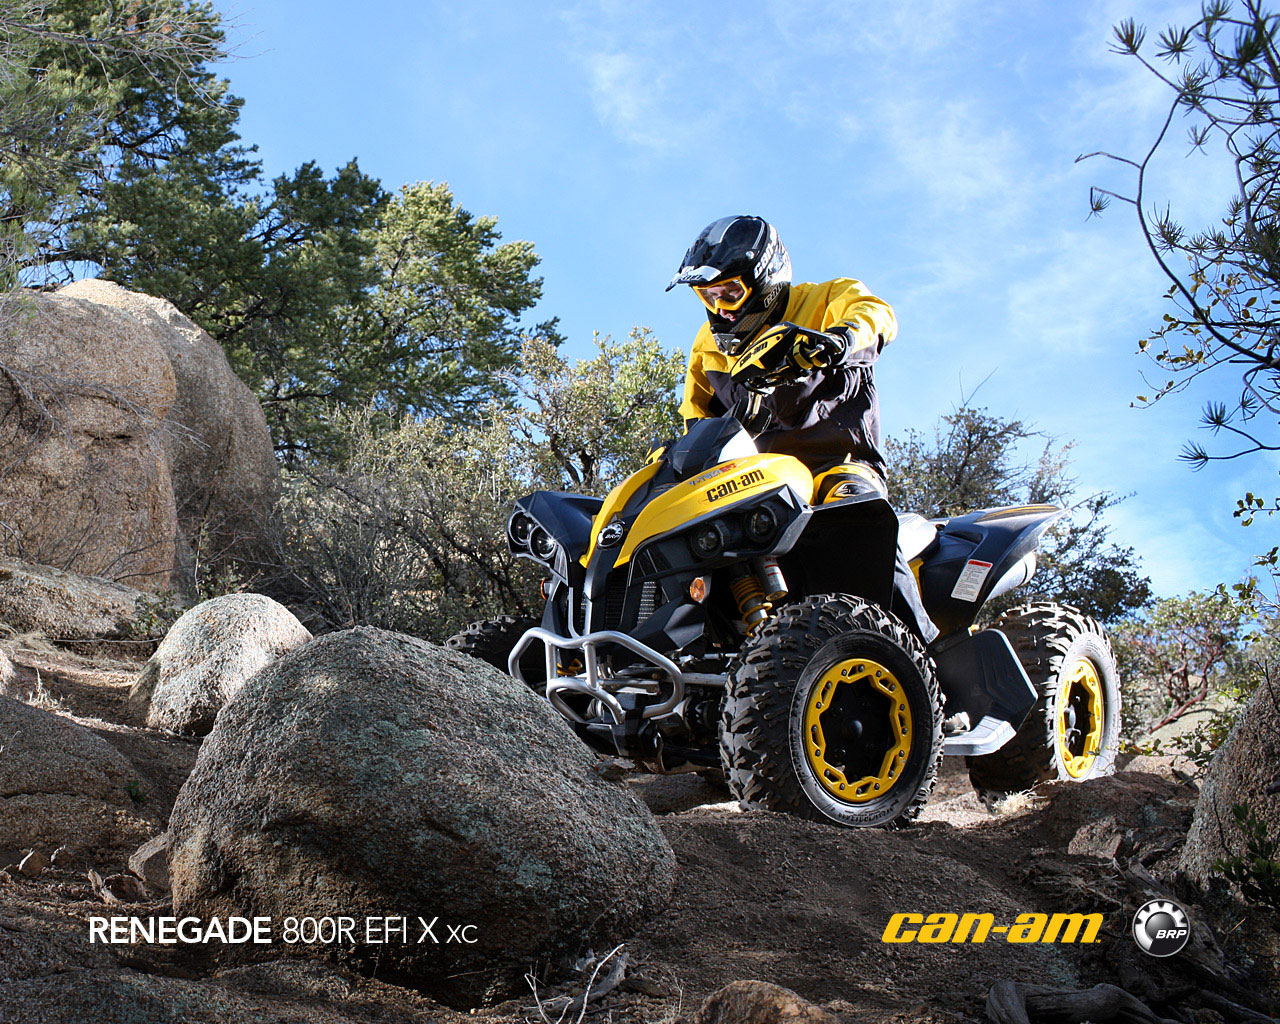 can-am renegade 800r x xc-pic. 3